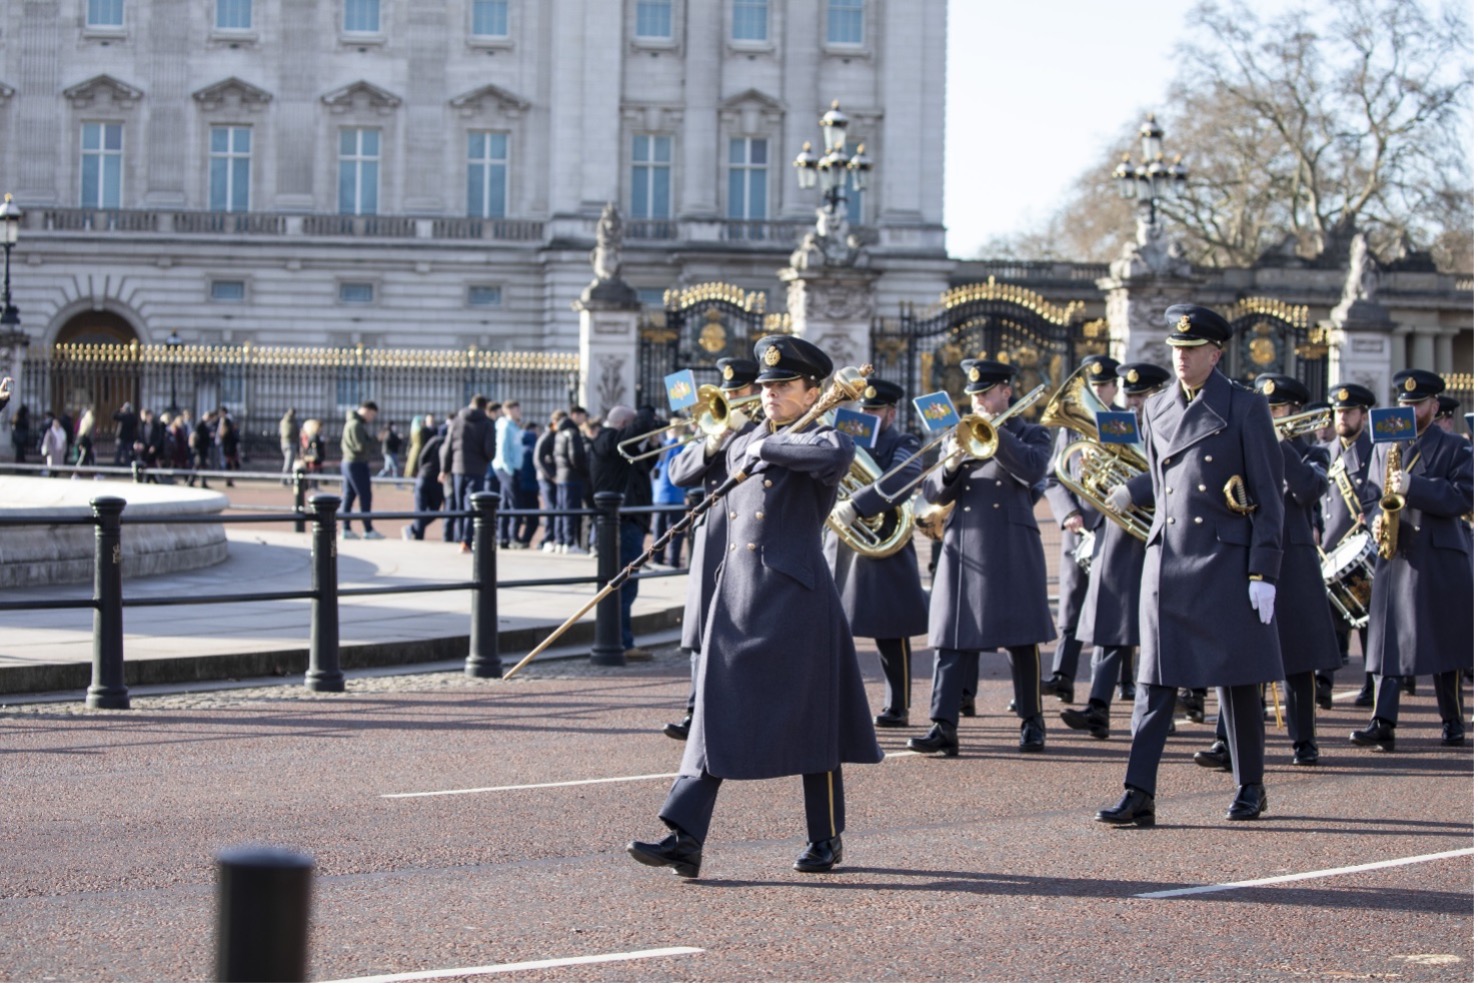 The Band play brass instruments in front of Buckingham Palace.